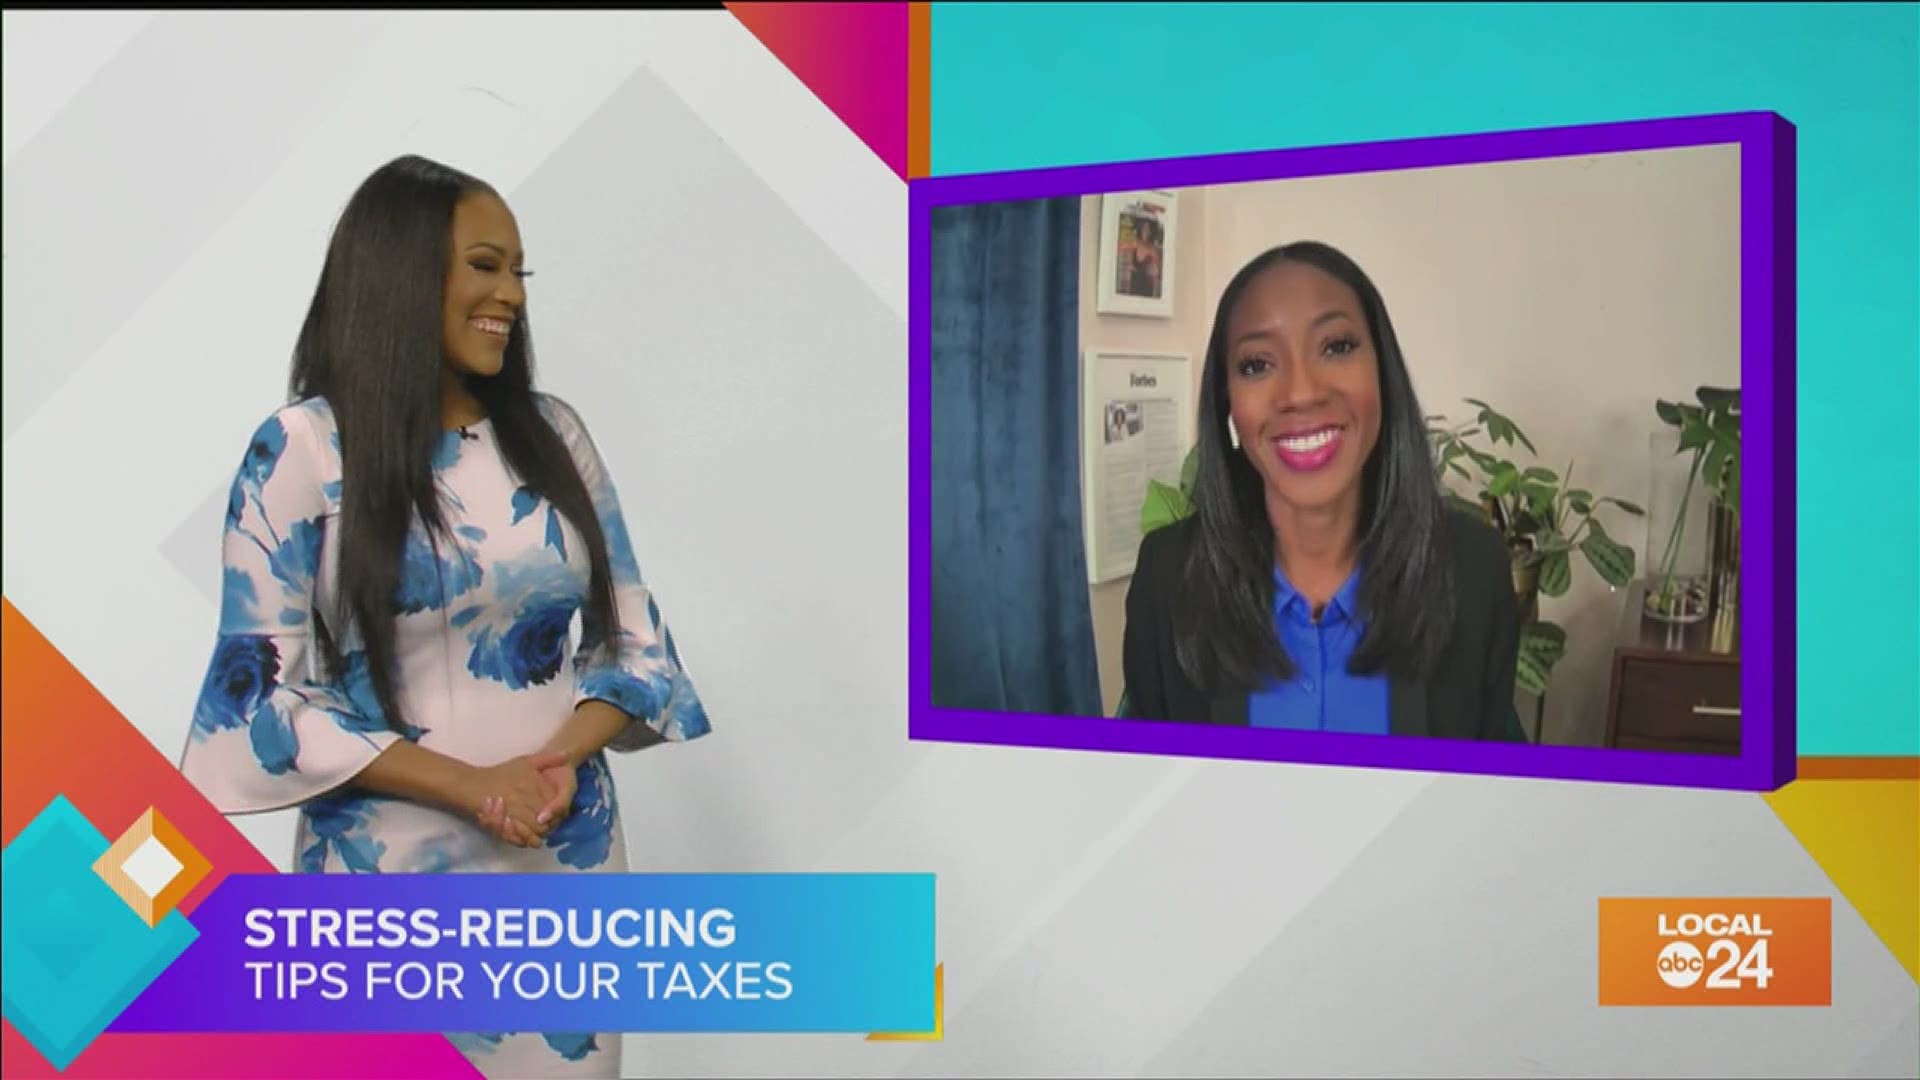 Looking to save money and make the most out of filing your taxes this year? Check out these tips from guest star My Fab Finance's financial expert, Tonya Rapley!